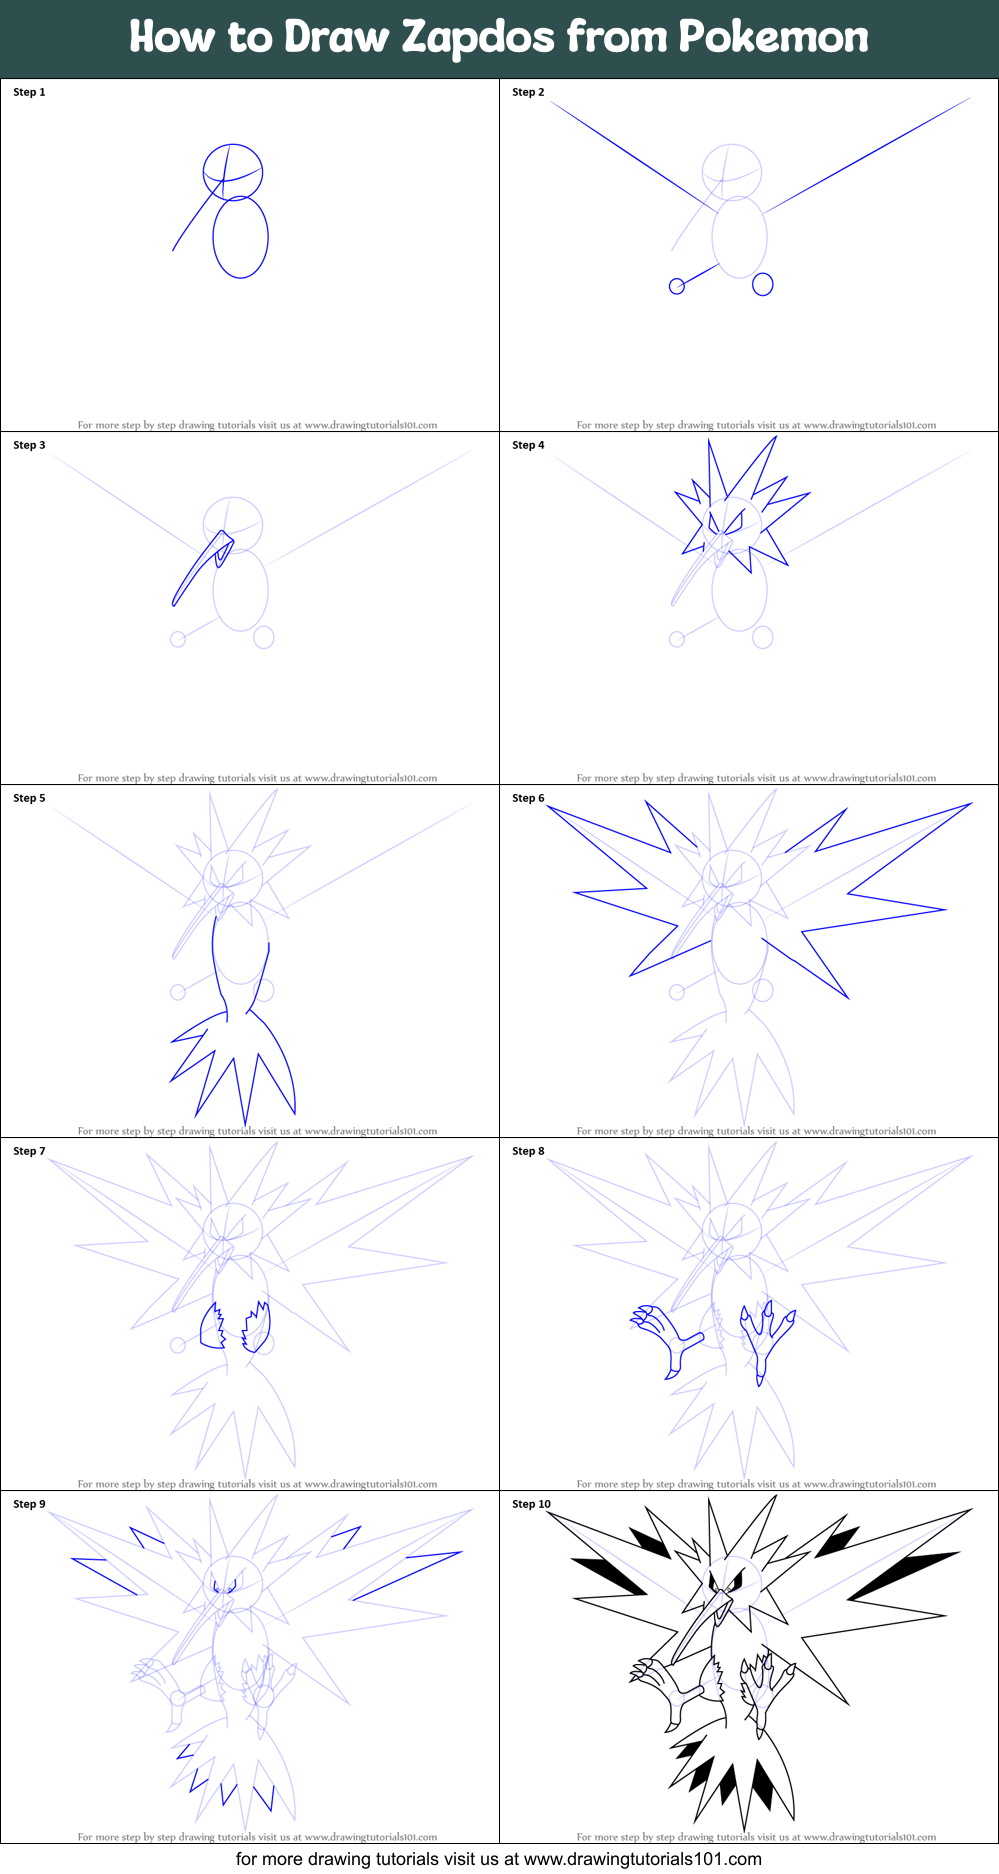 How to Draw Zapdos from Pokemon printable step by step drawing sheet